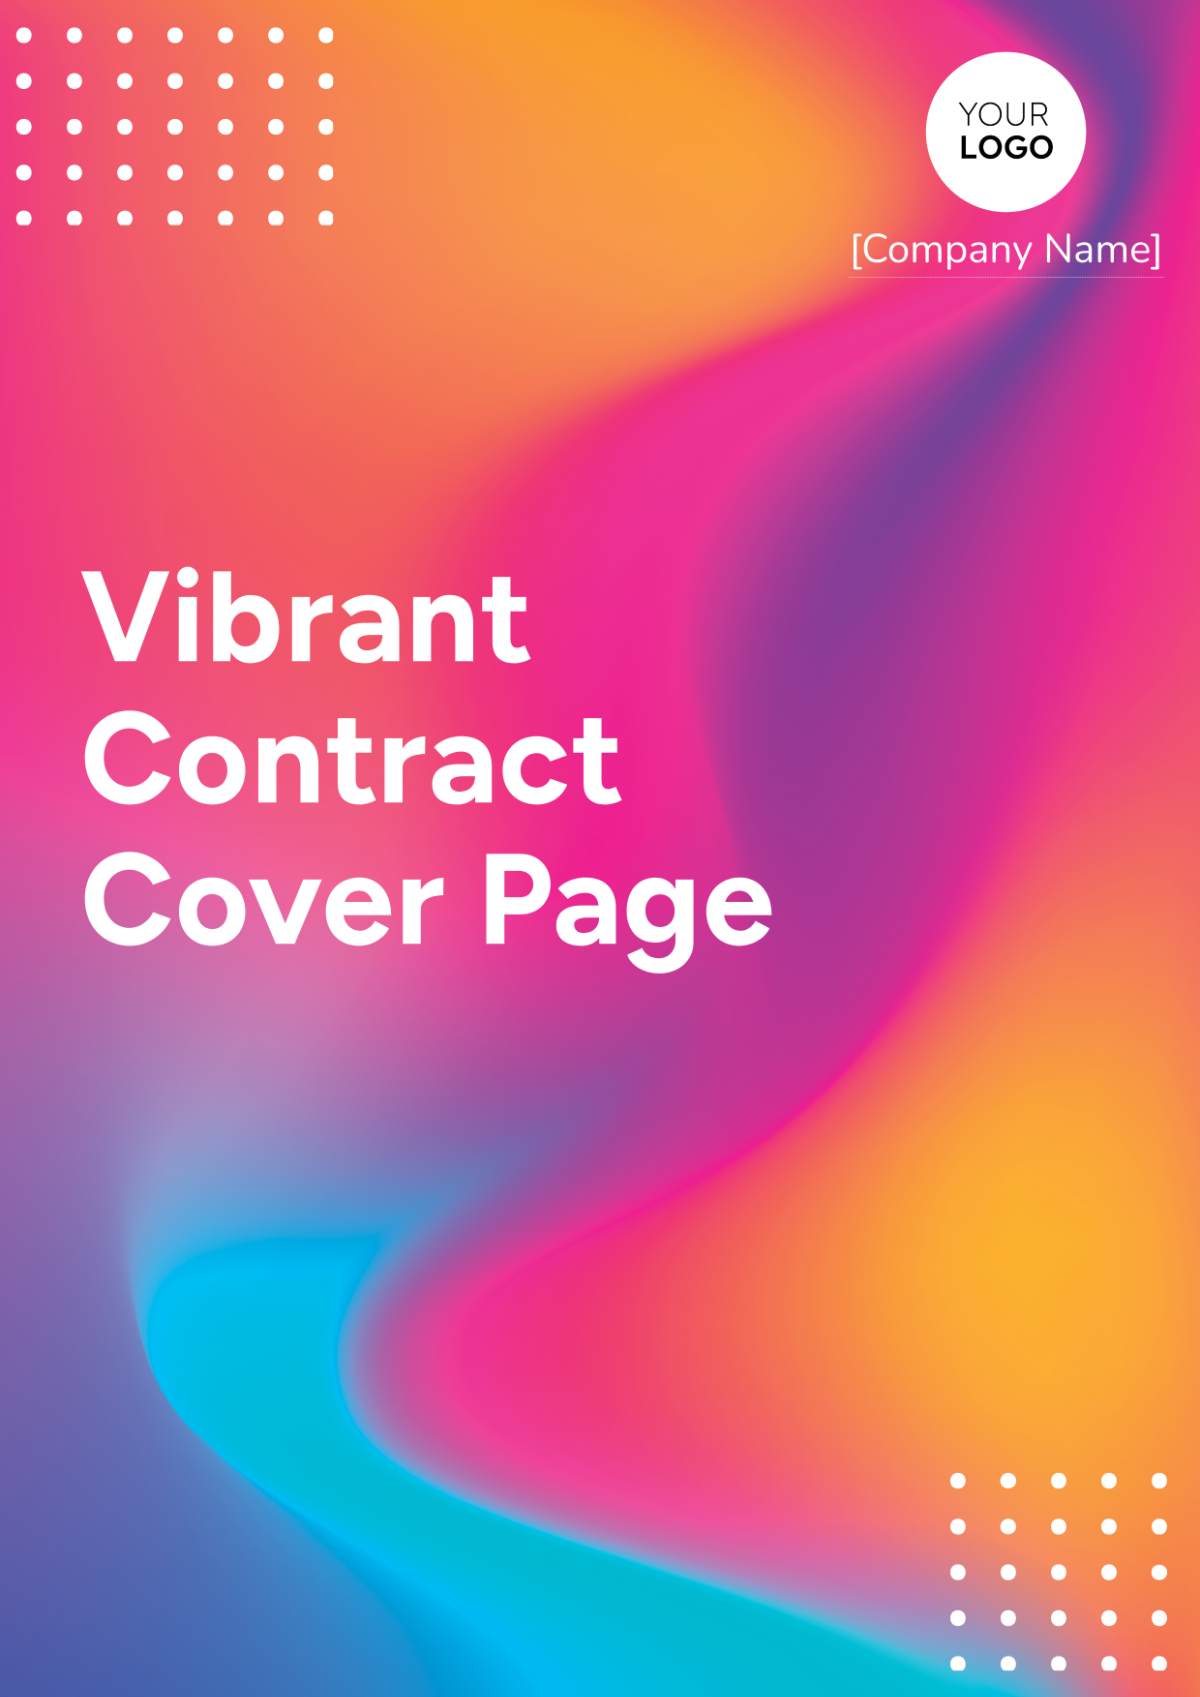 Vibrant Contract Cover Page Template